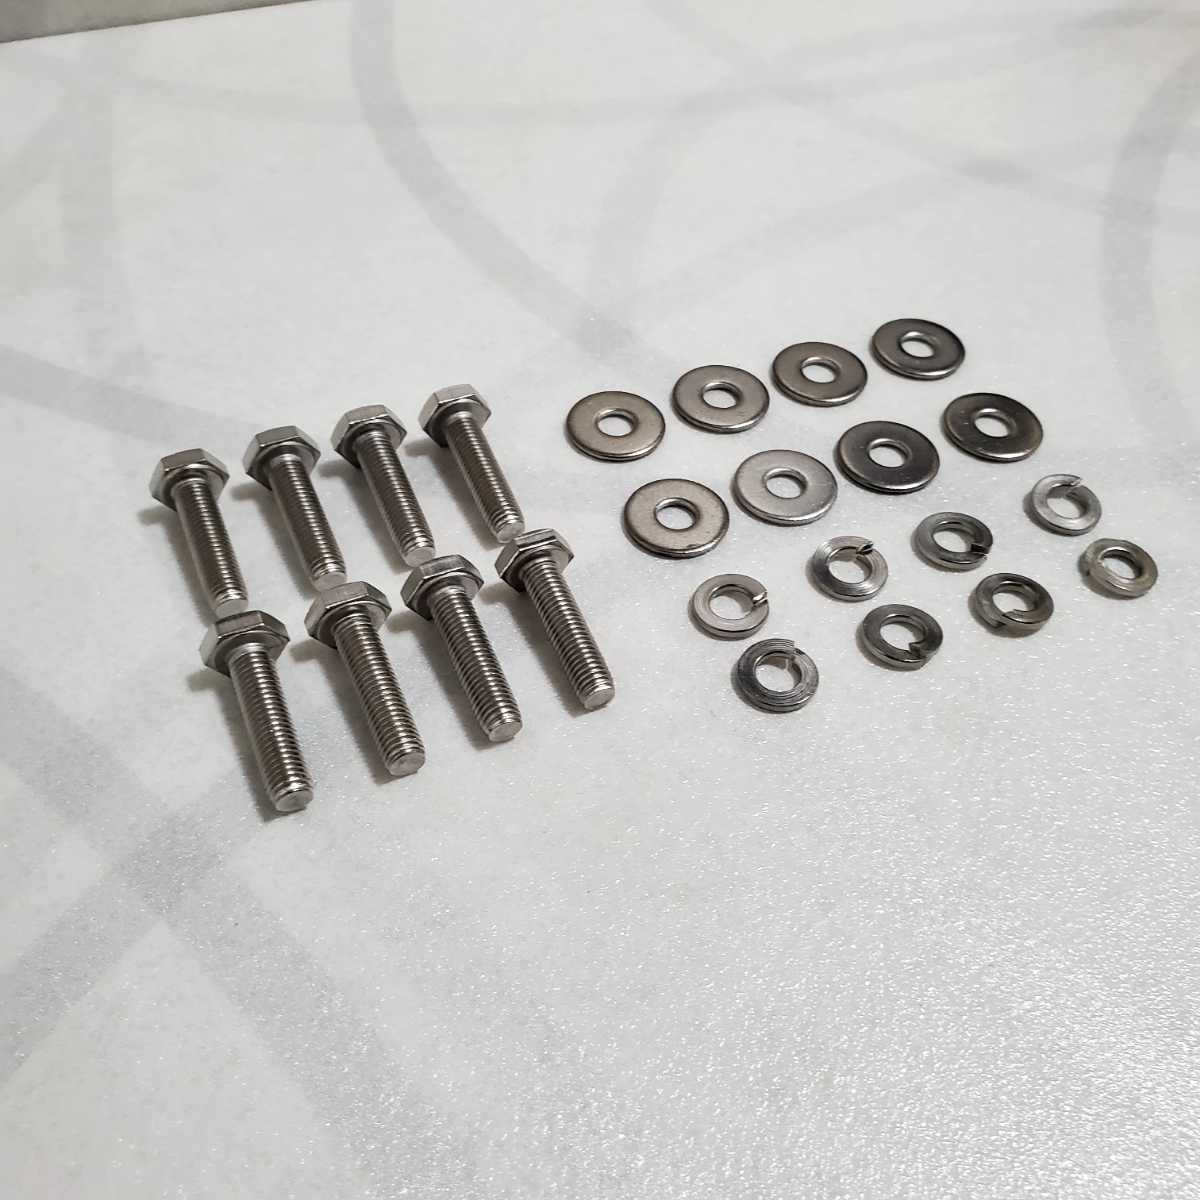  Rover Mini front shock absorber top bracket fitting kit stainless steel type left right set / one stand amount new goods 